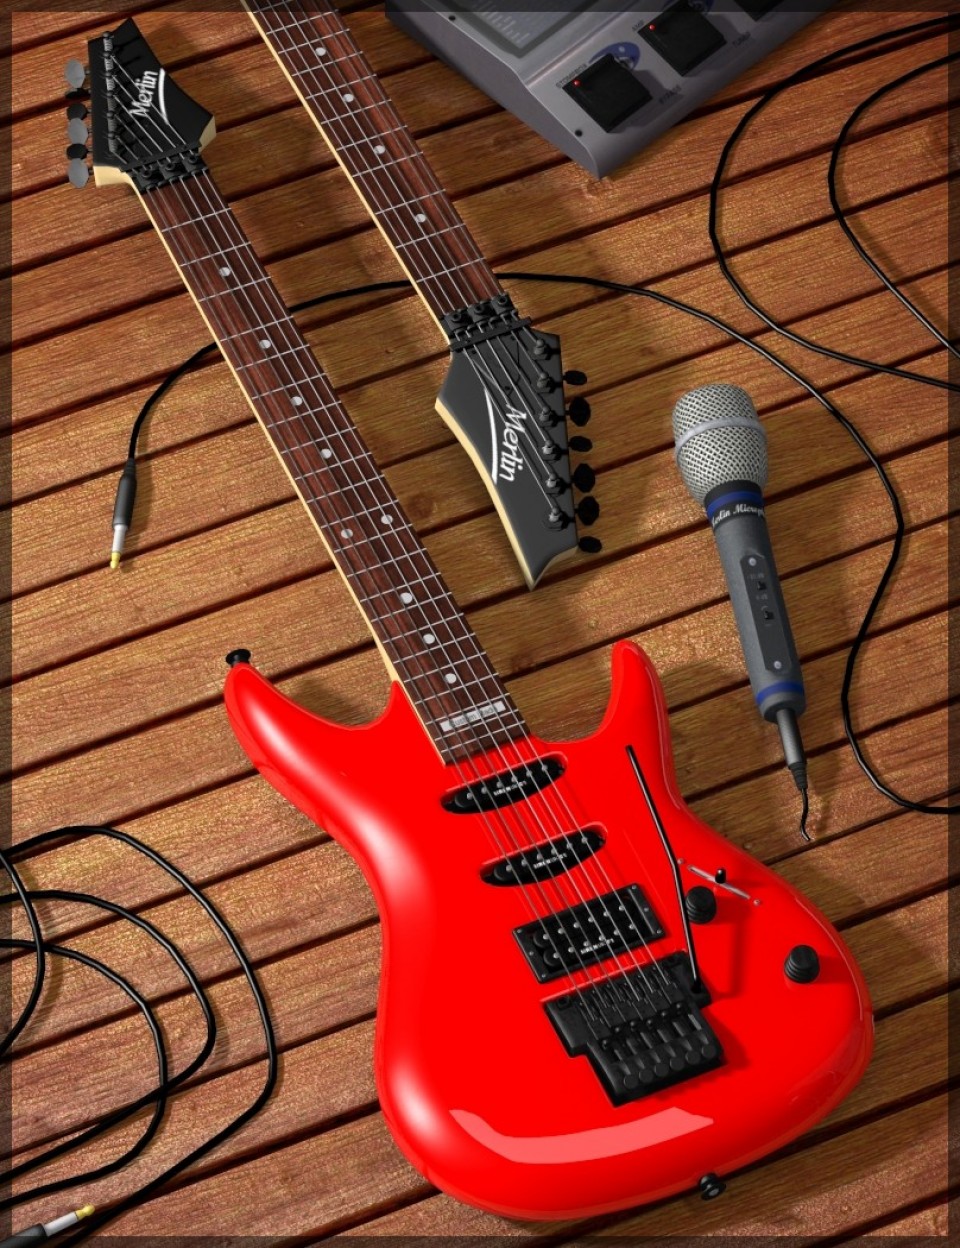 Guitar and Props_DAZ3DDL